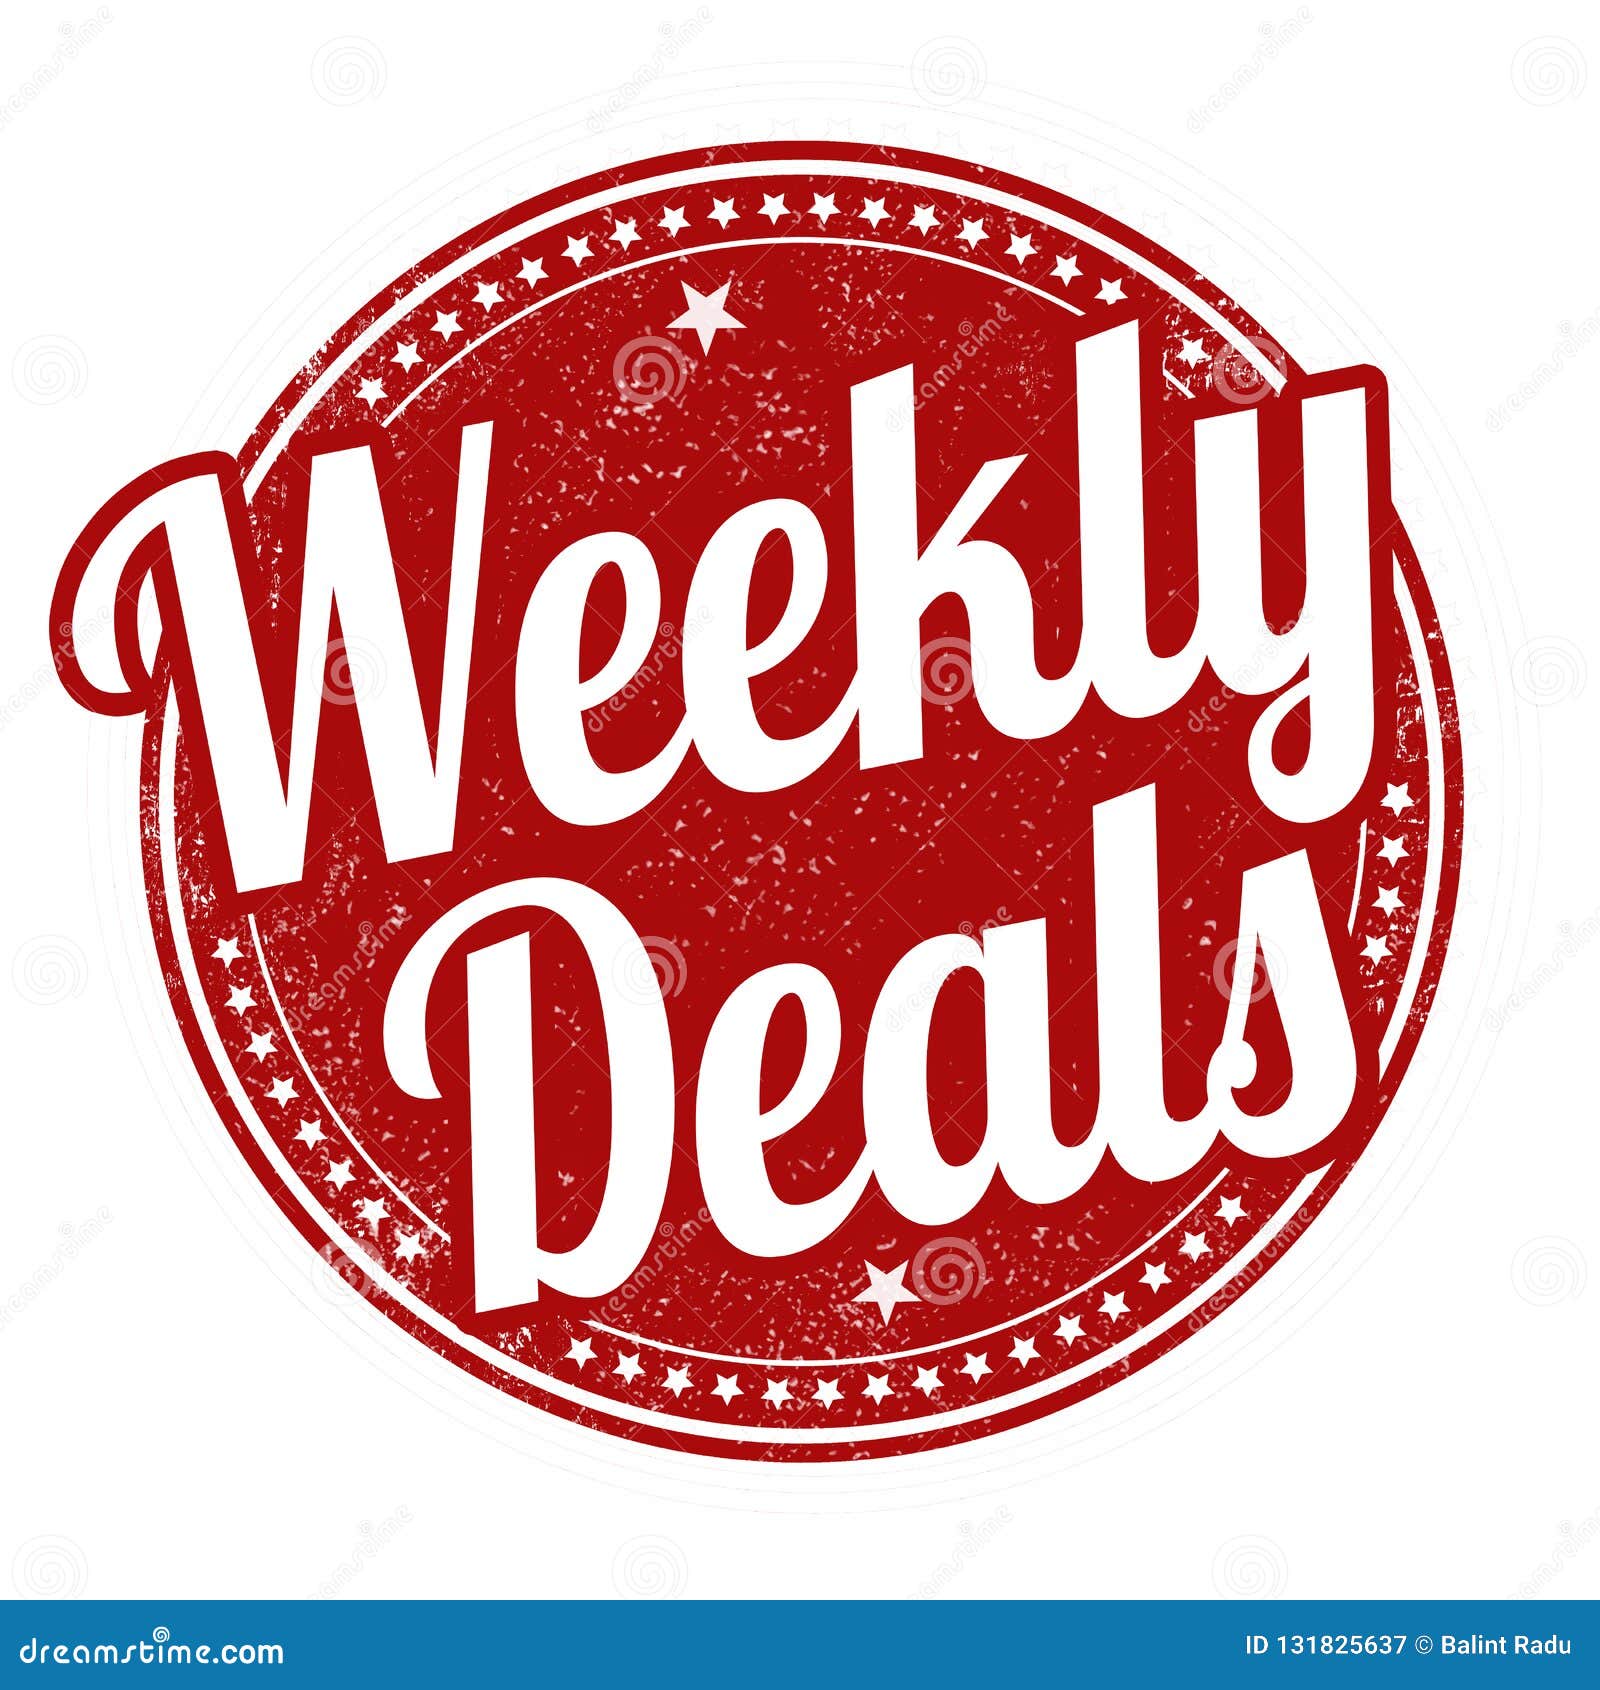 weekly deals sign or stamp